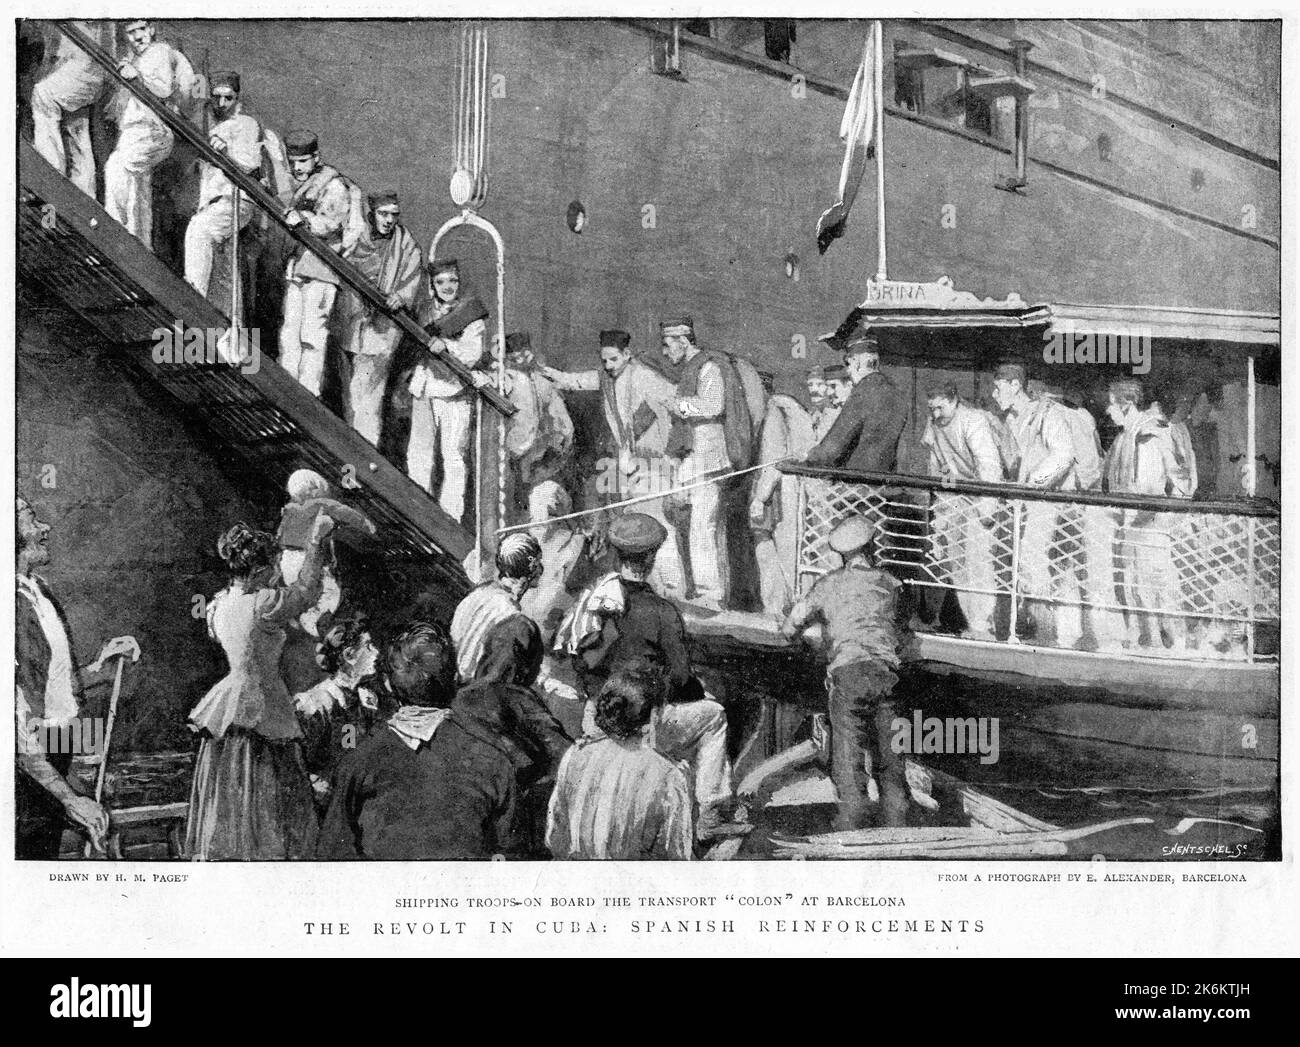 Troops embark for the revolt in Cuba - Spanish reinforcements on the transport Colon at Barcelona. From the Graphic newspaper, 1896 Stock Photo